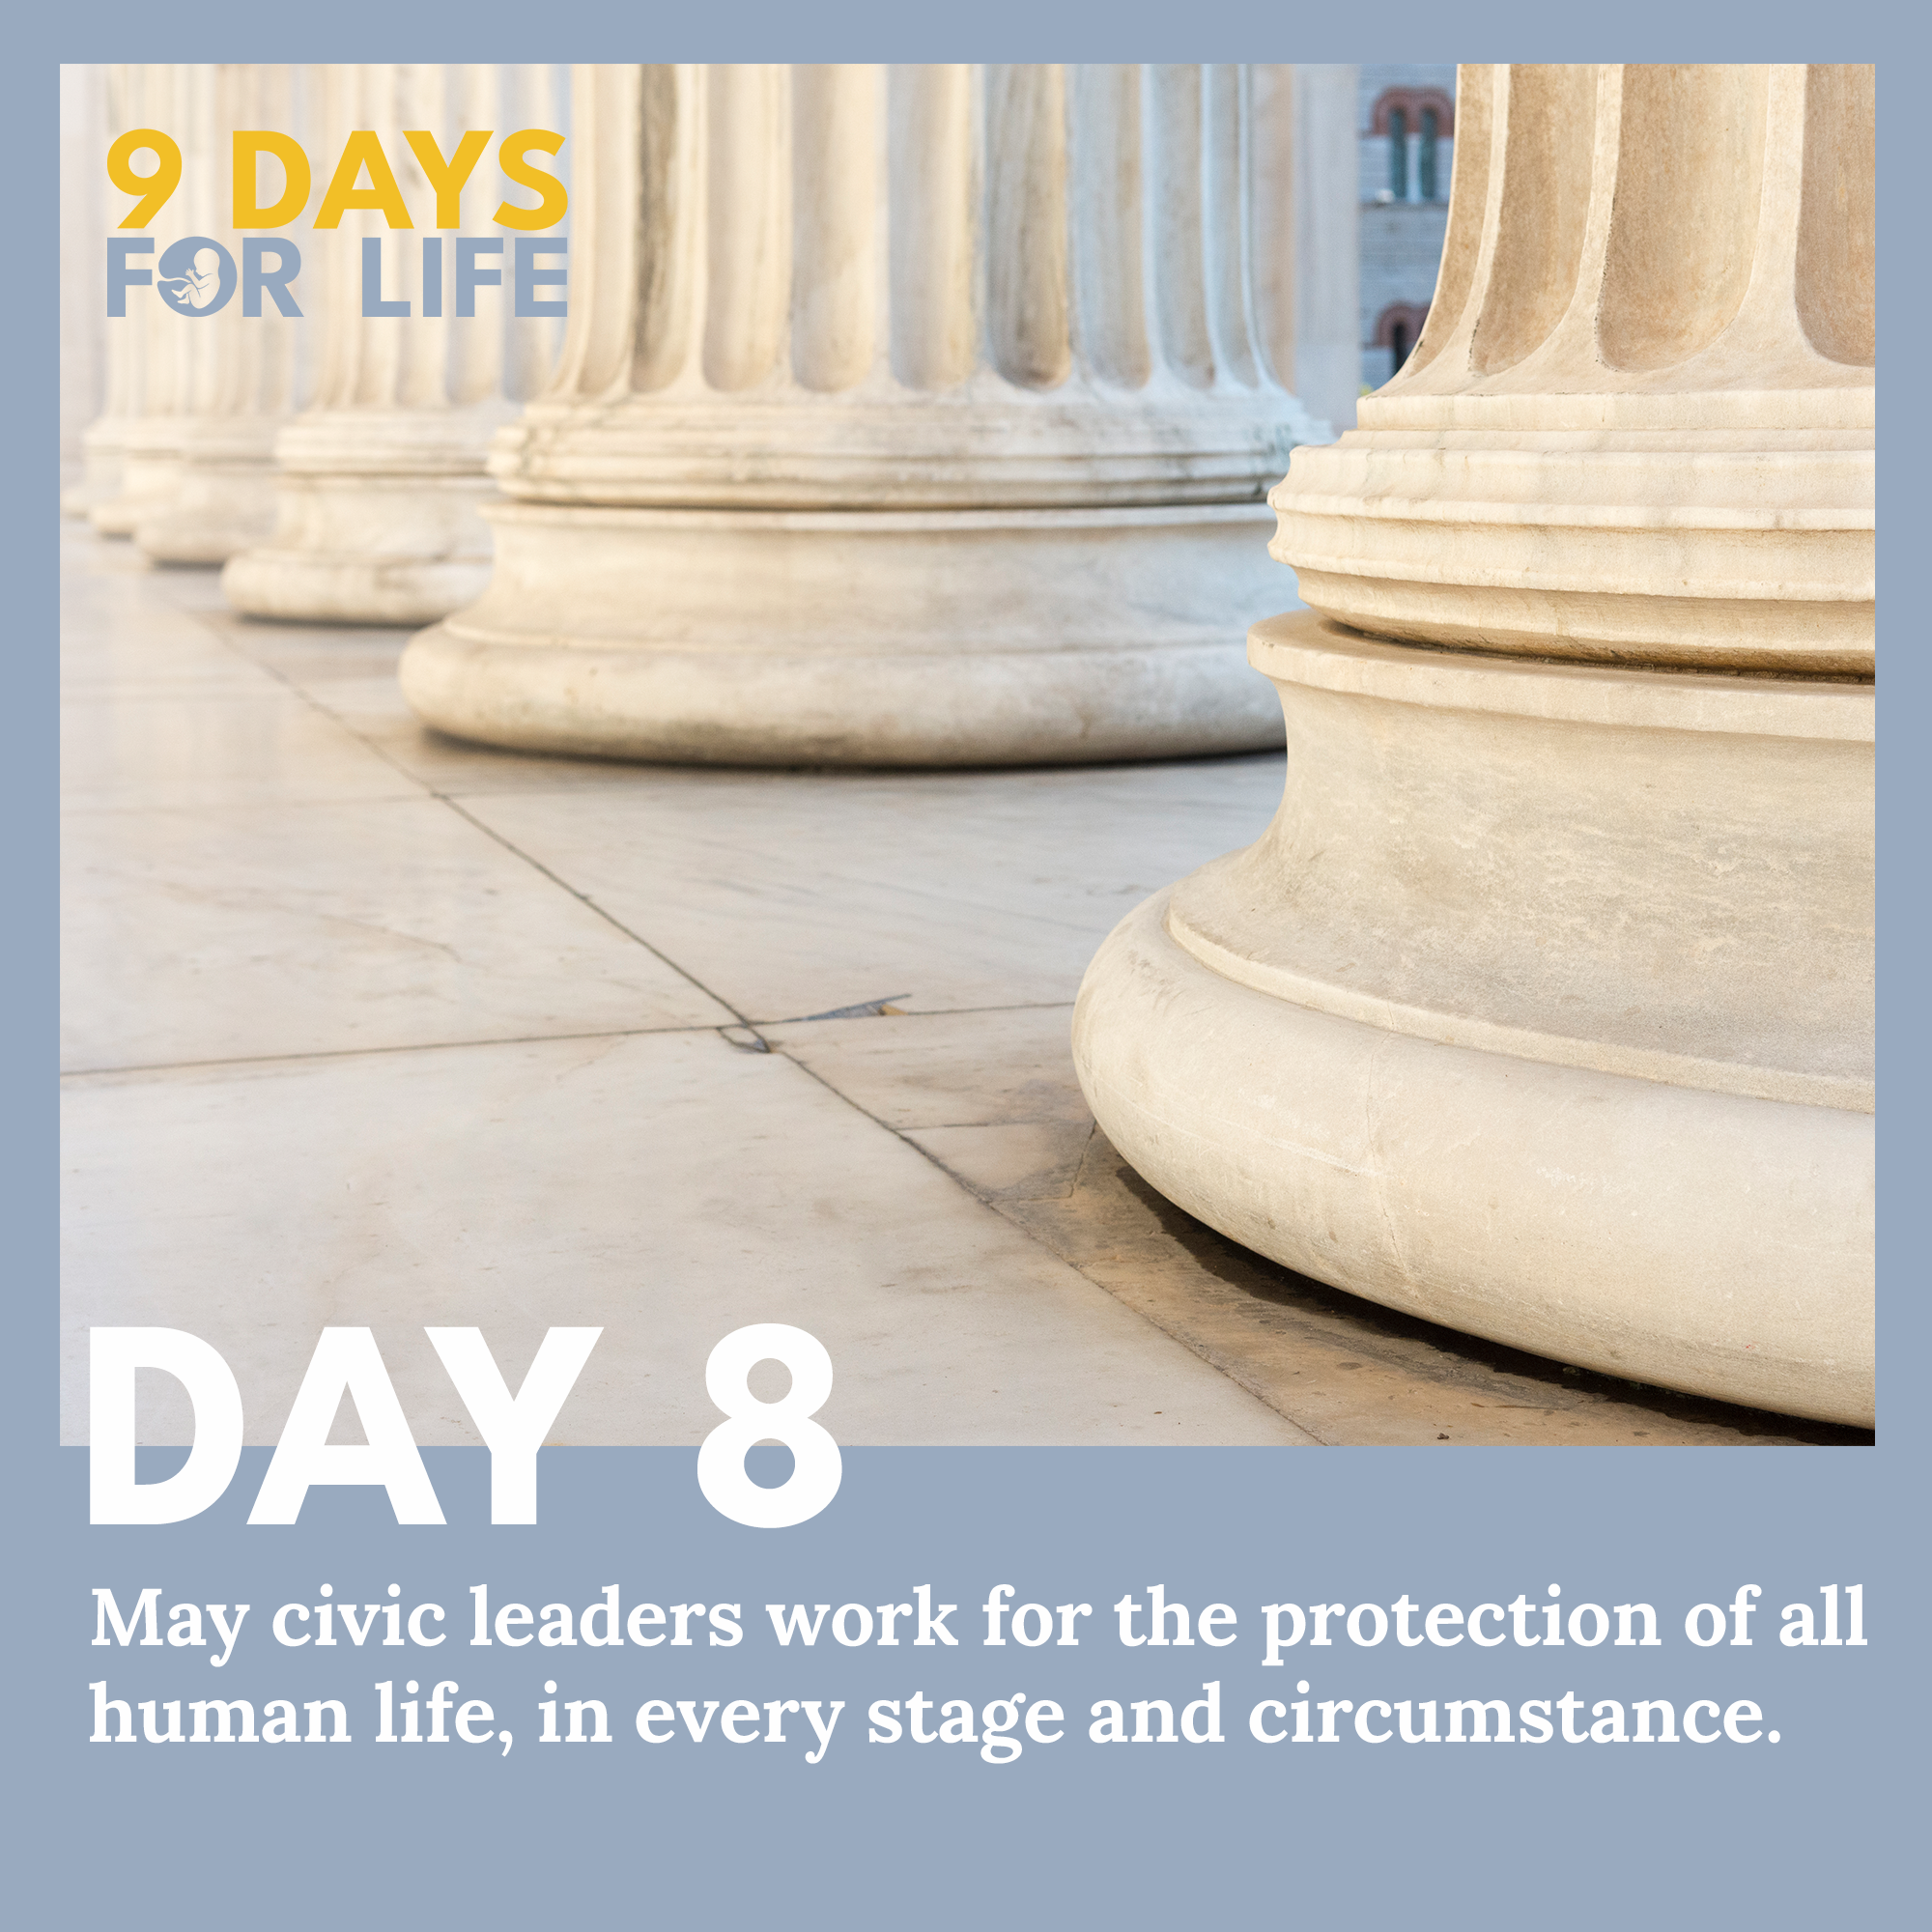 Day 8 - 9 Days for Life - Pillars